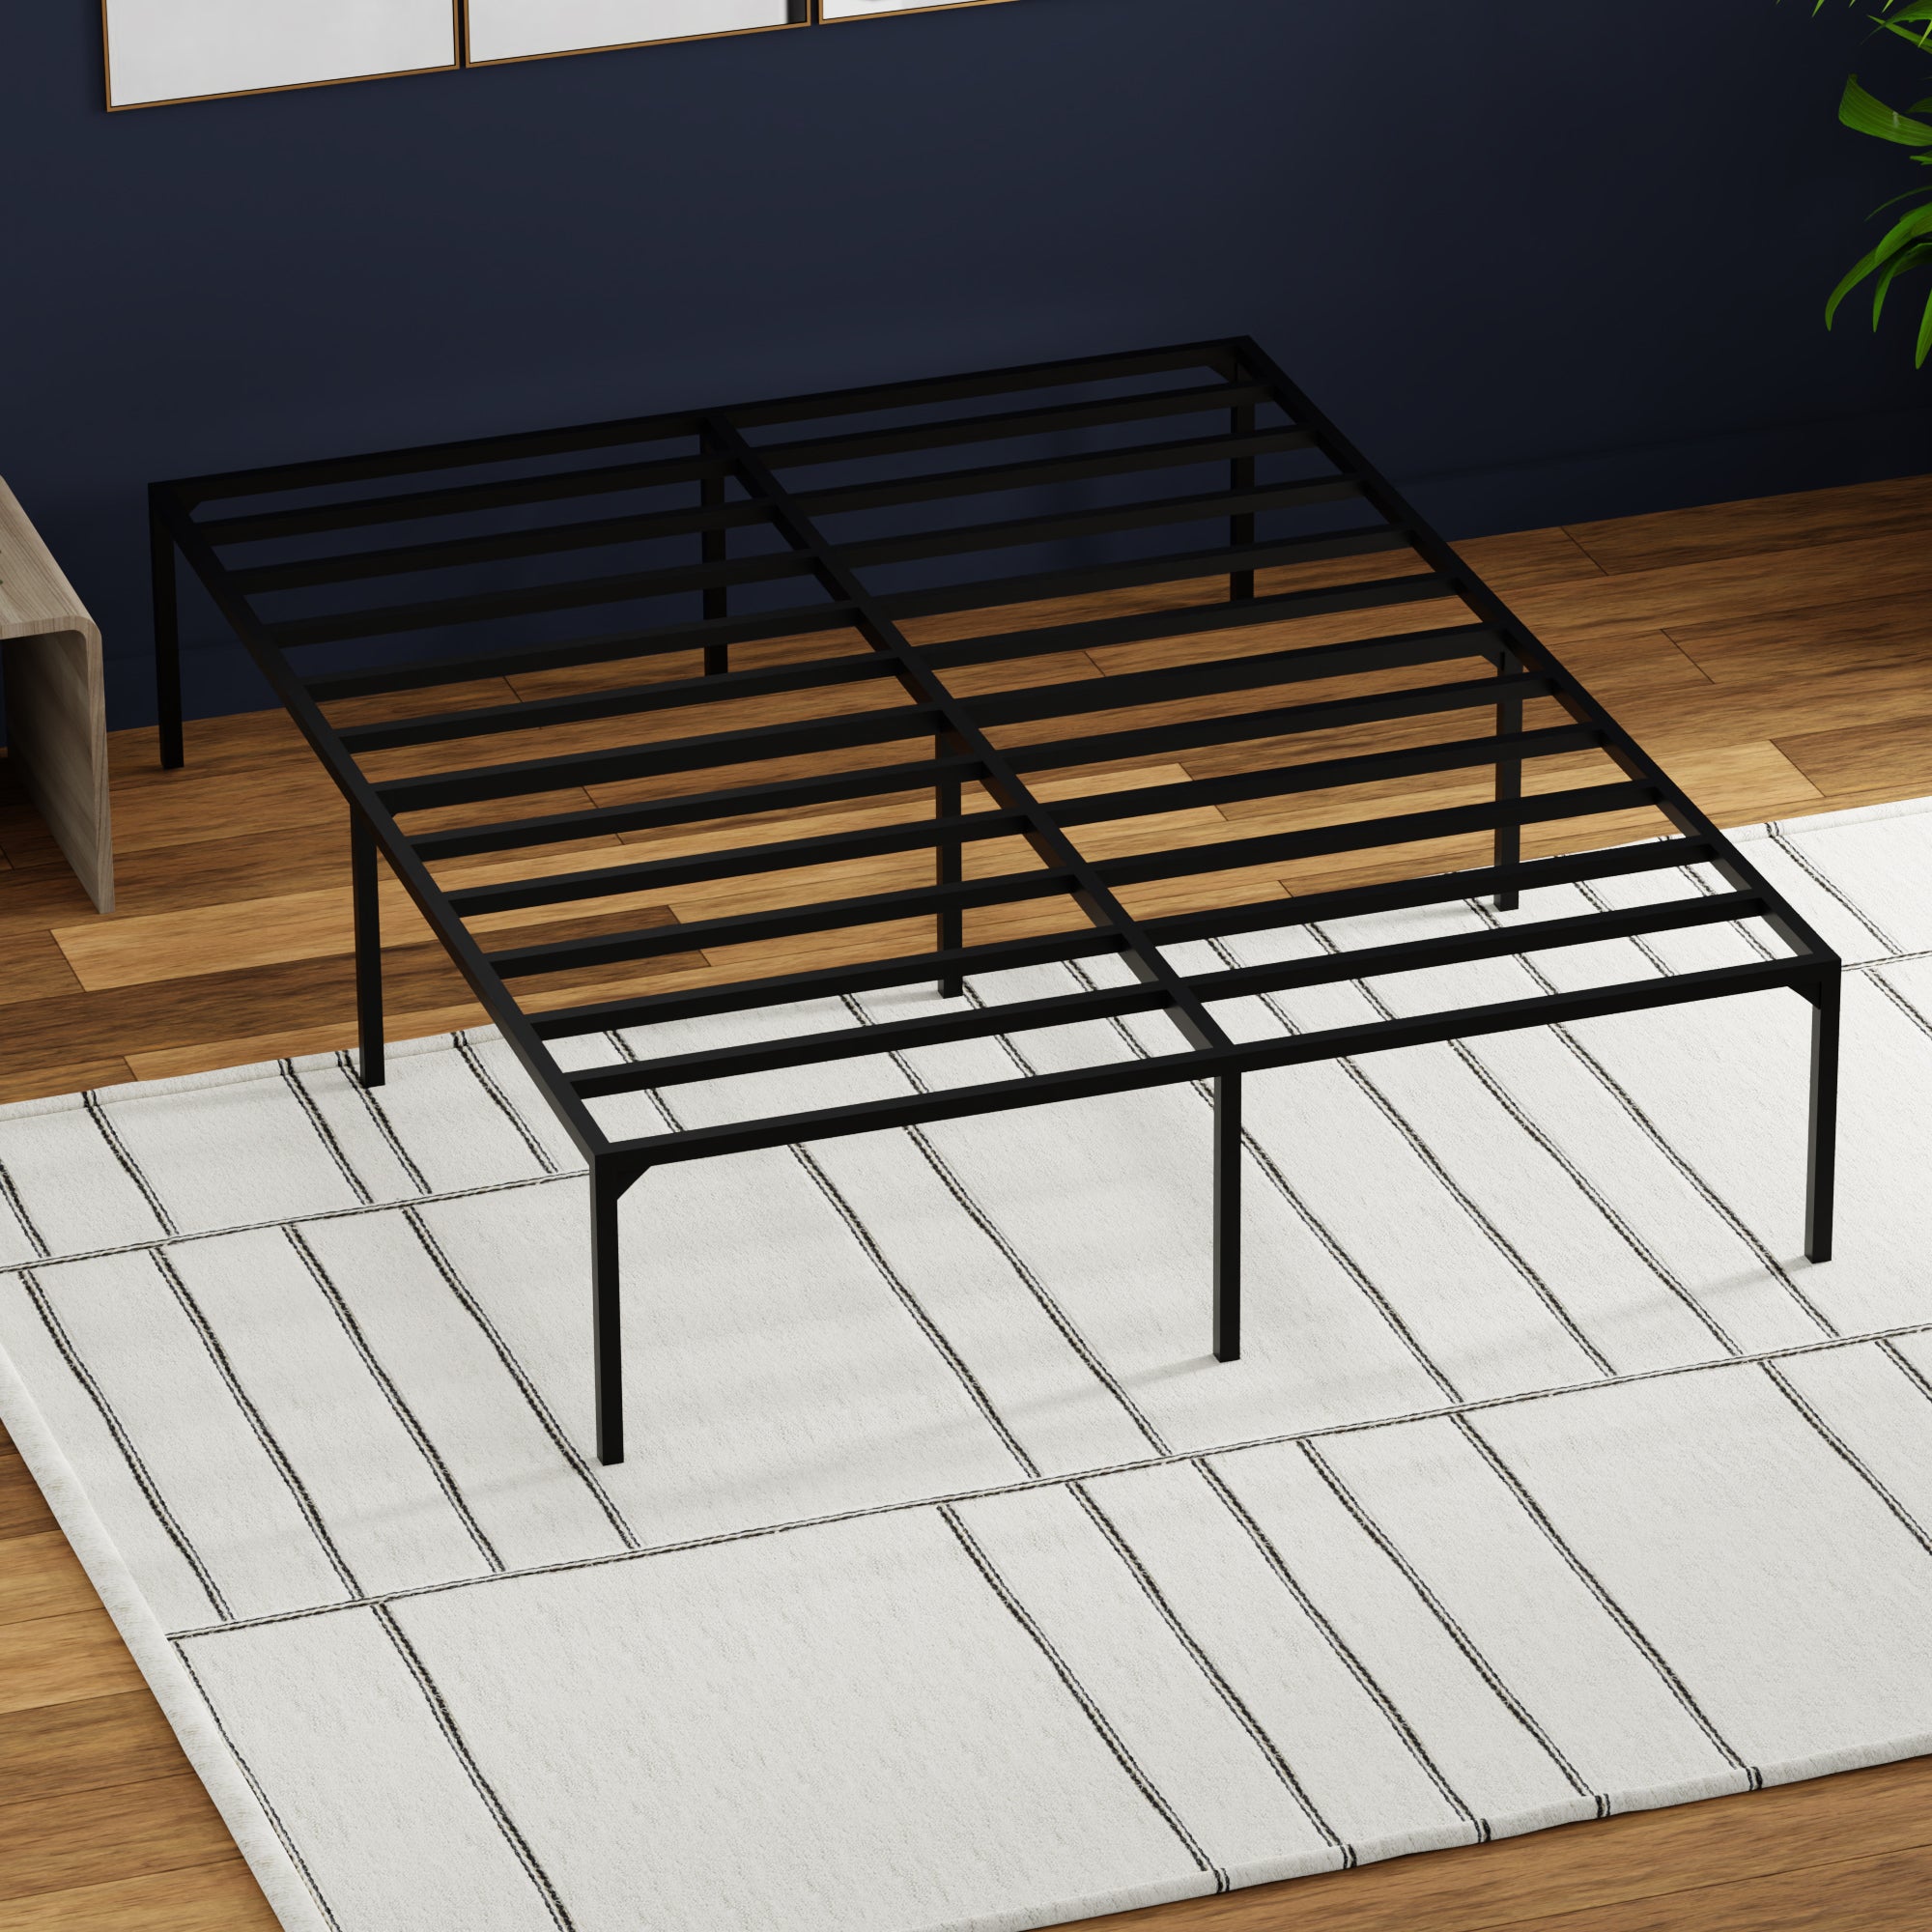 Metal Mattress Foundation with Removable Cover - BlissfulNights.com